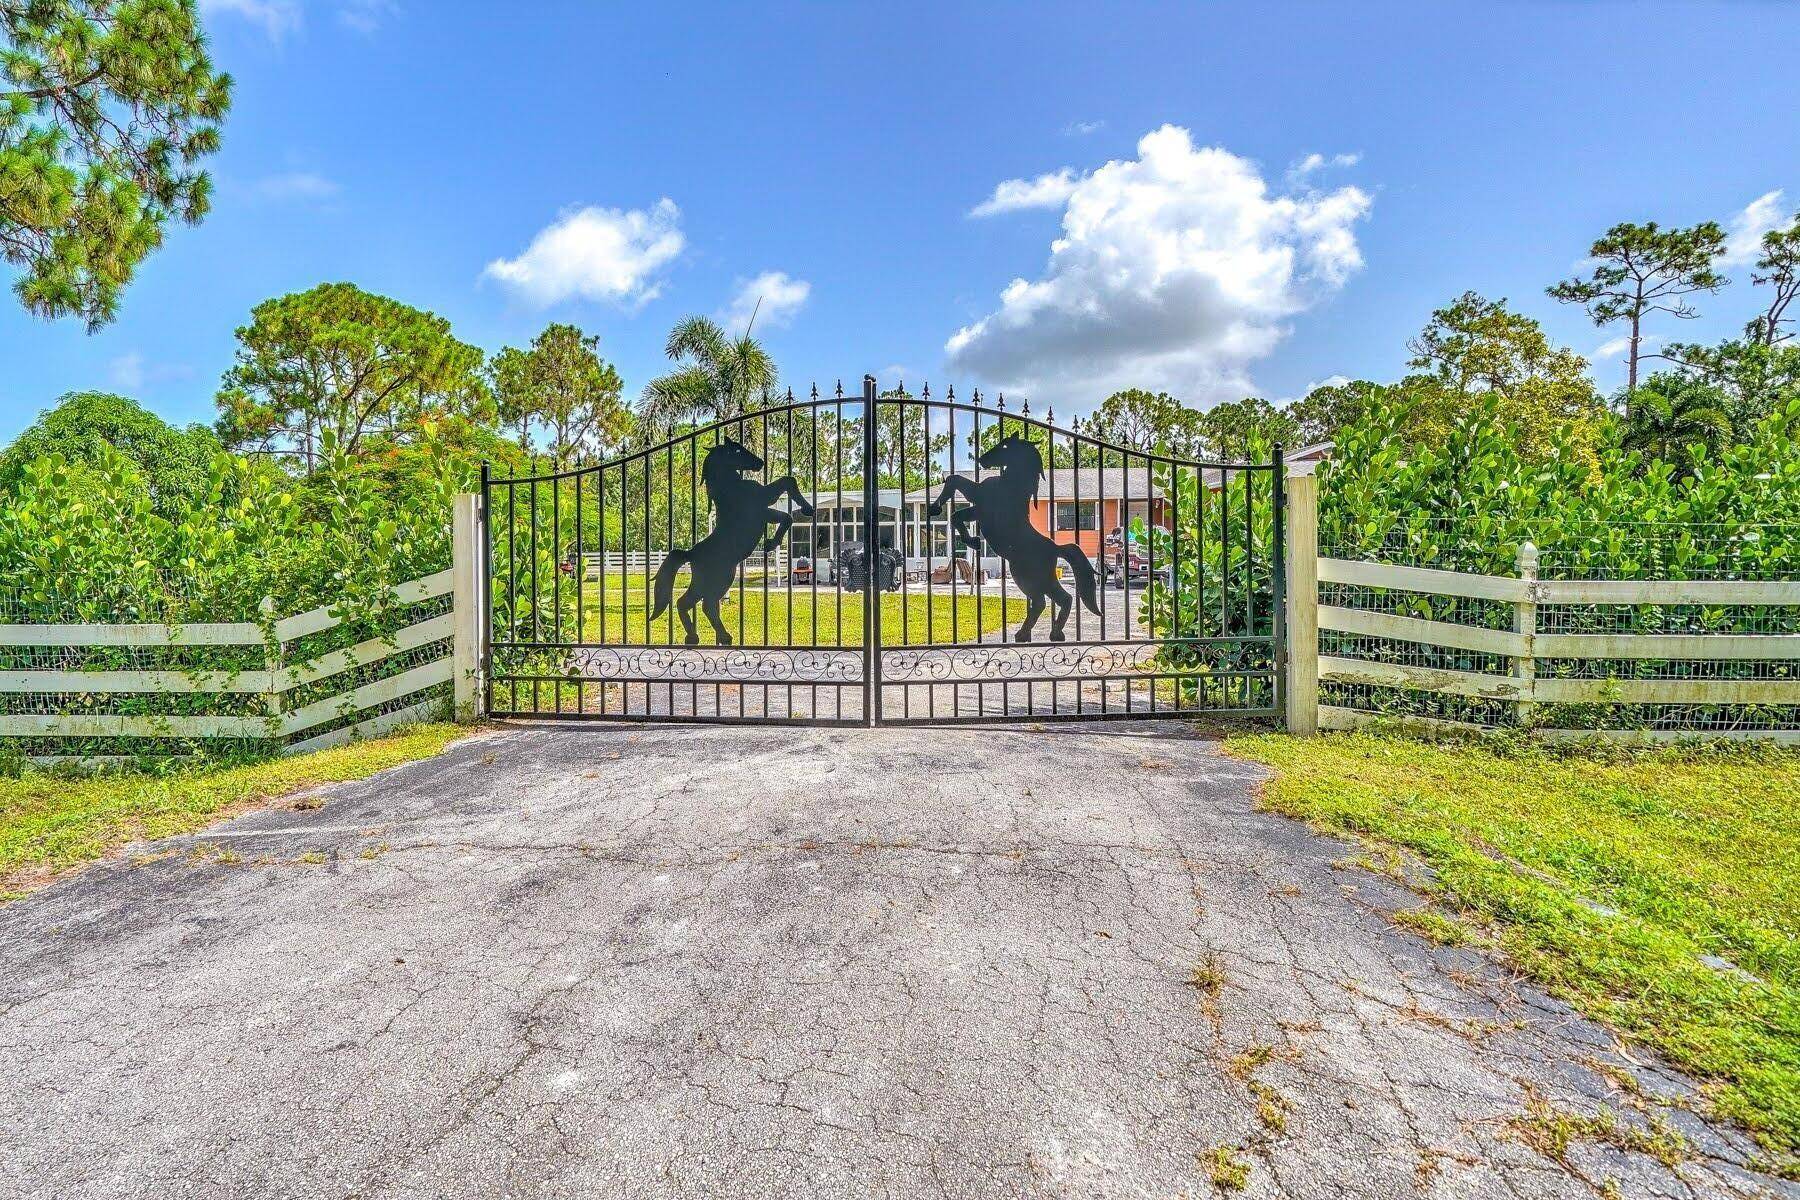 Discover Your Dream Equestrian Retreat 4 Bed, 2 Bath Home on Over 1 Acre in Loxahatchee This stunning 4 bed, 2 bath single family home is a true equestrian paradise ...